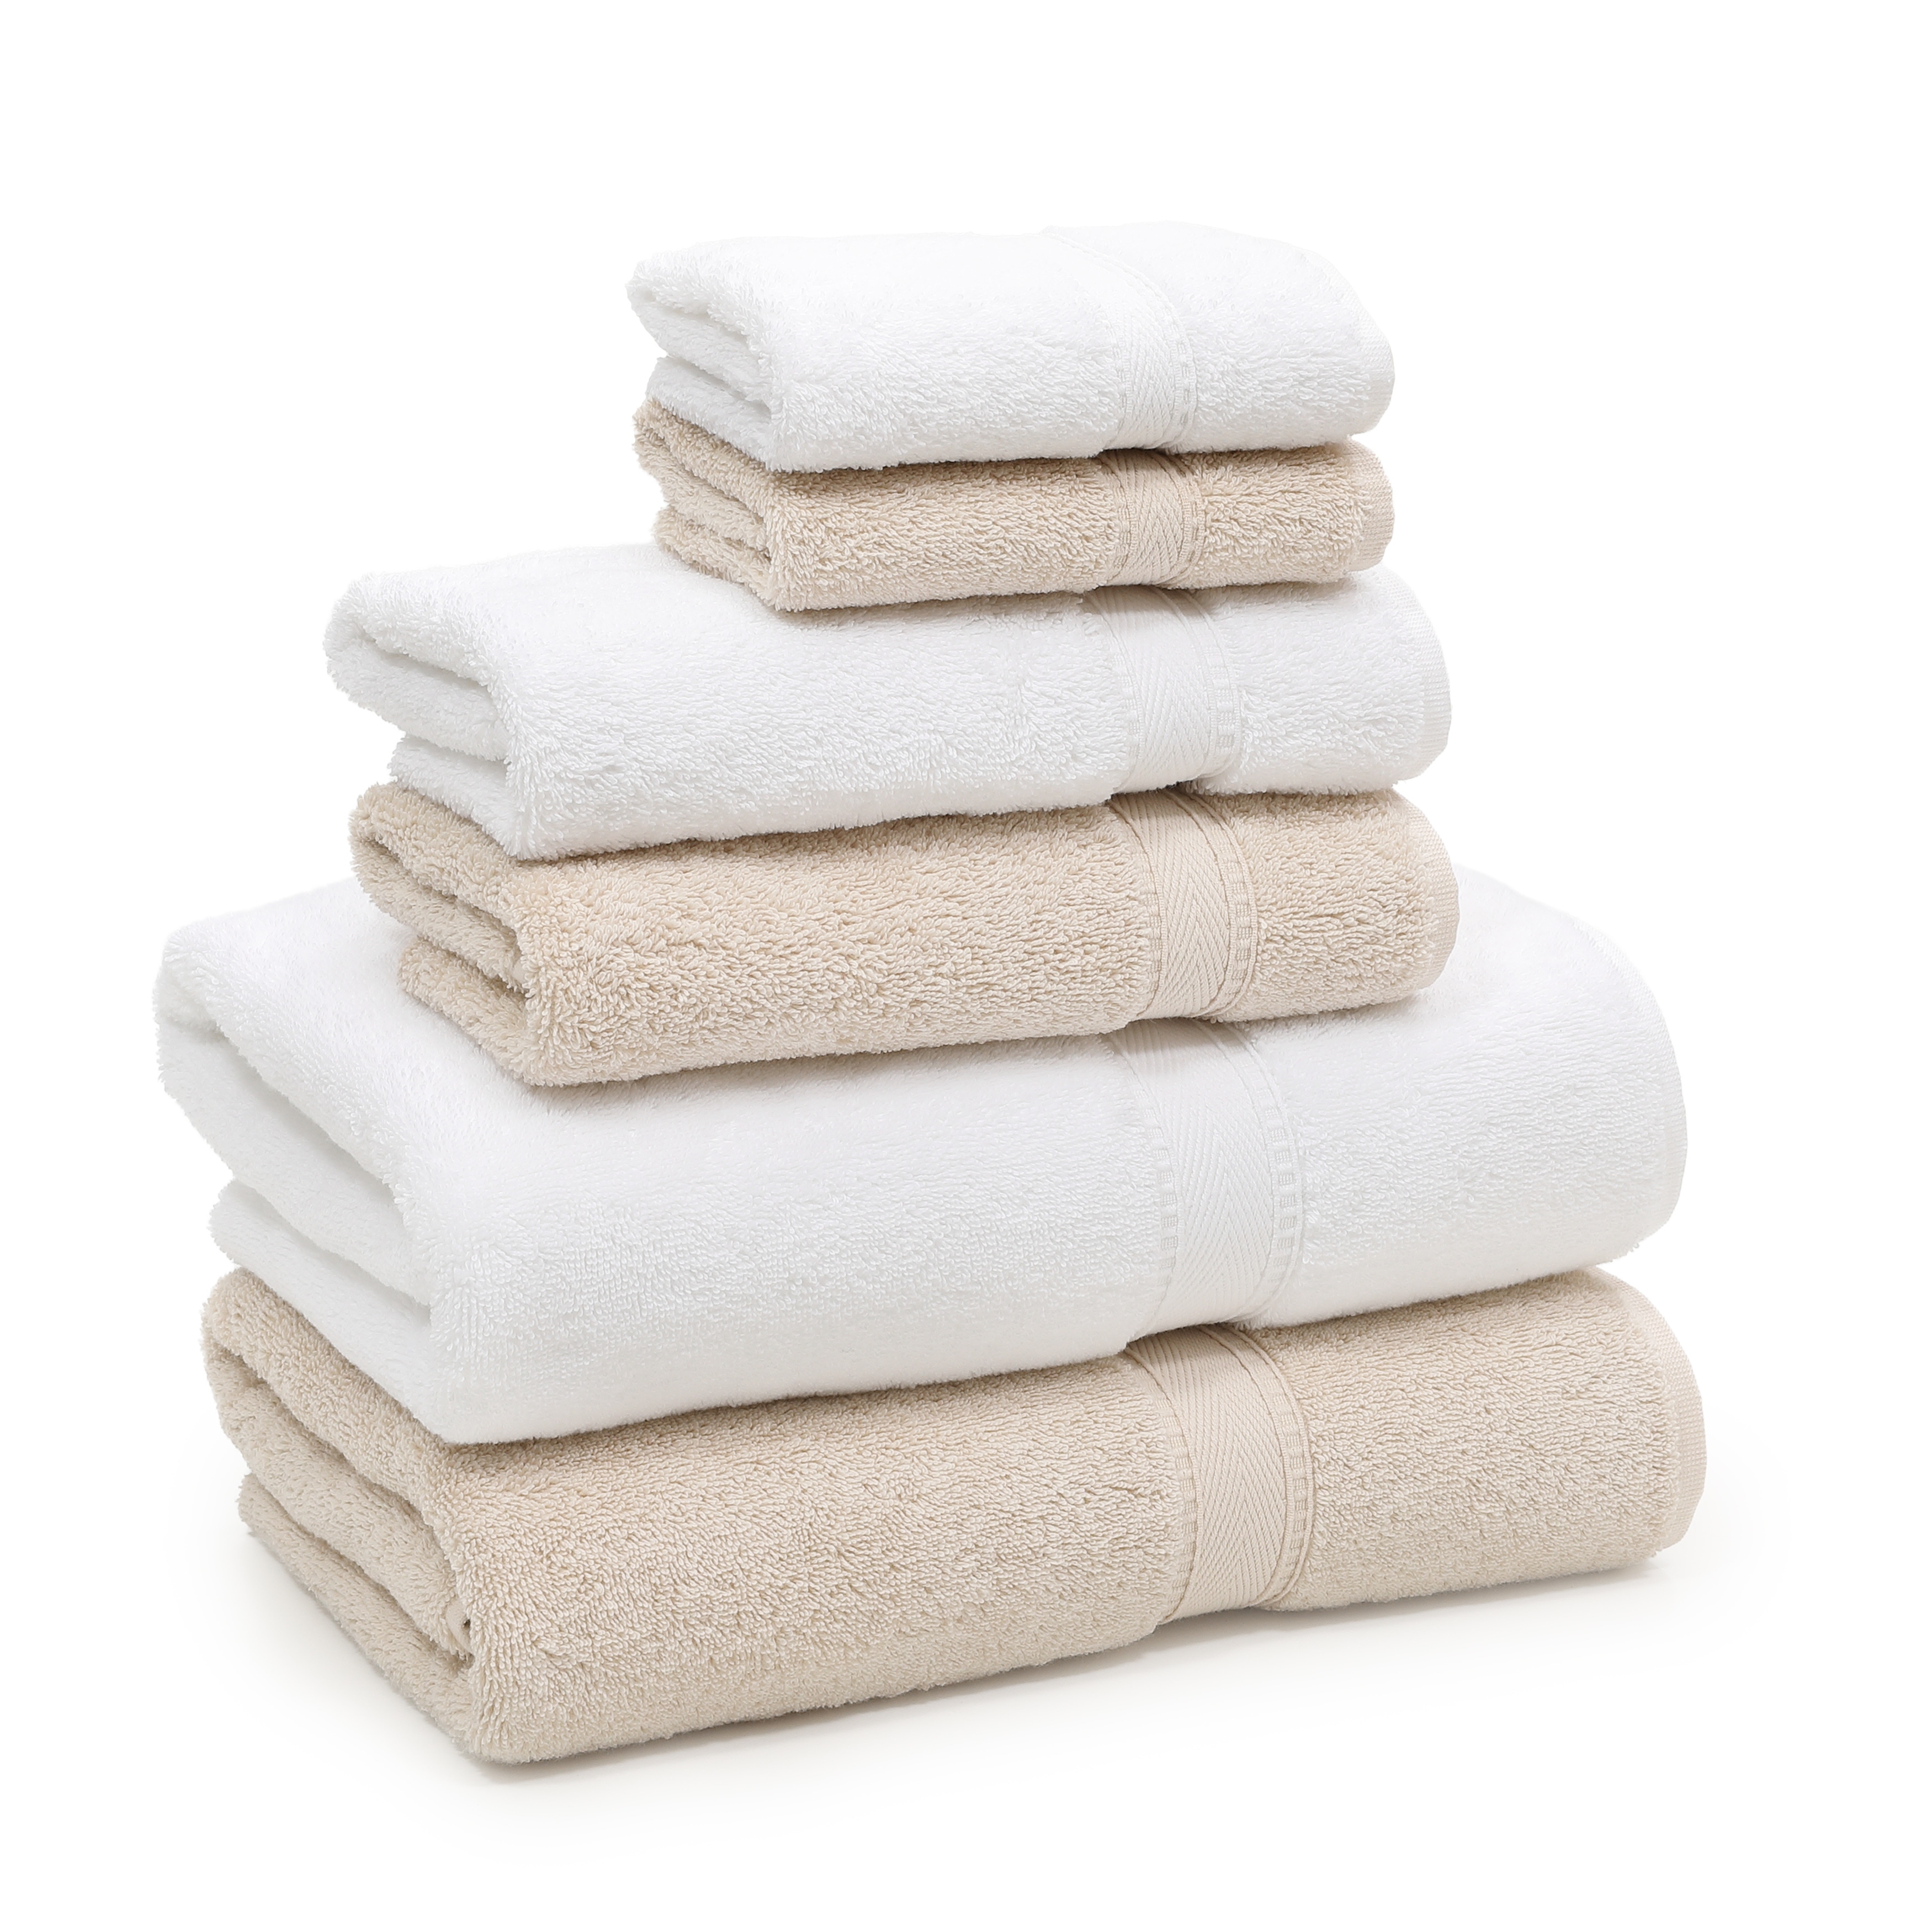 https://ak1.ostkcdn.com/images/products/is/images/direct/fb7abcbe9ff3e2a97dd9a514d85478e2ccc1109e/Authentic-Hotel-and-Spa-Turkish-Cotton-6-piece-Towel-Set.jpg